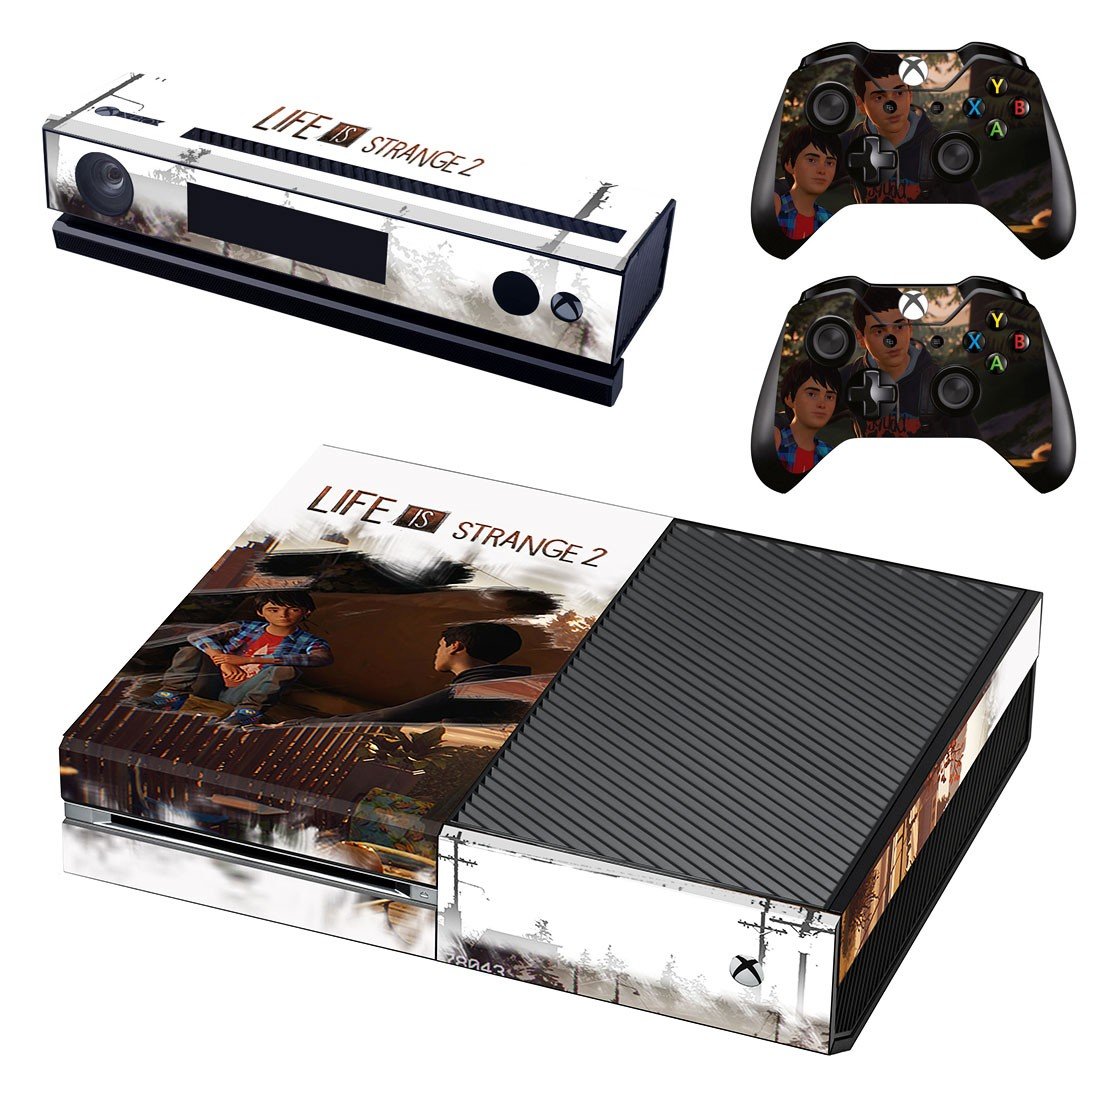 Xbox One And Controllers Skin Sticker - Life is Strange 2